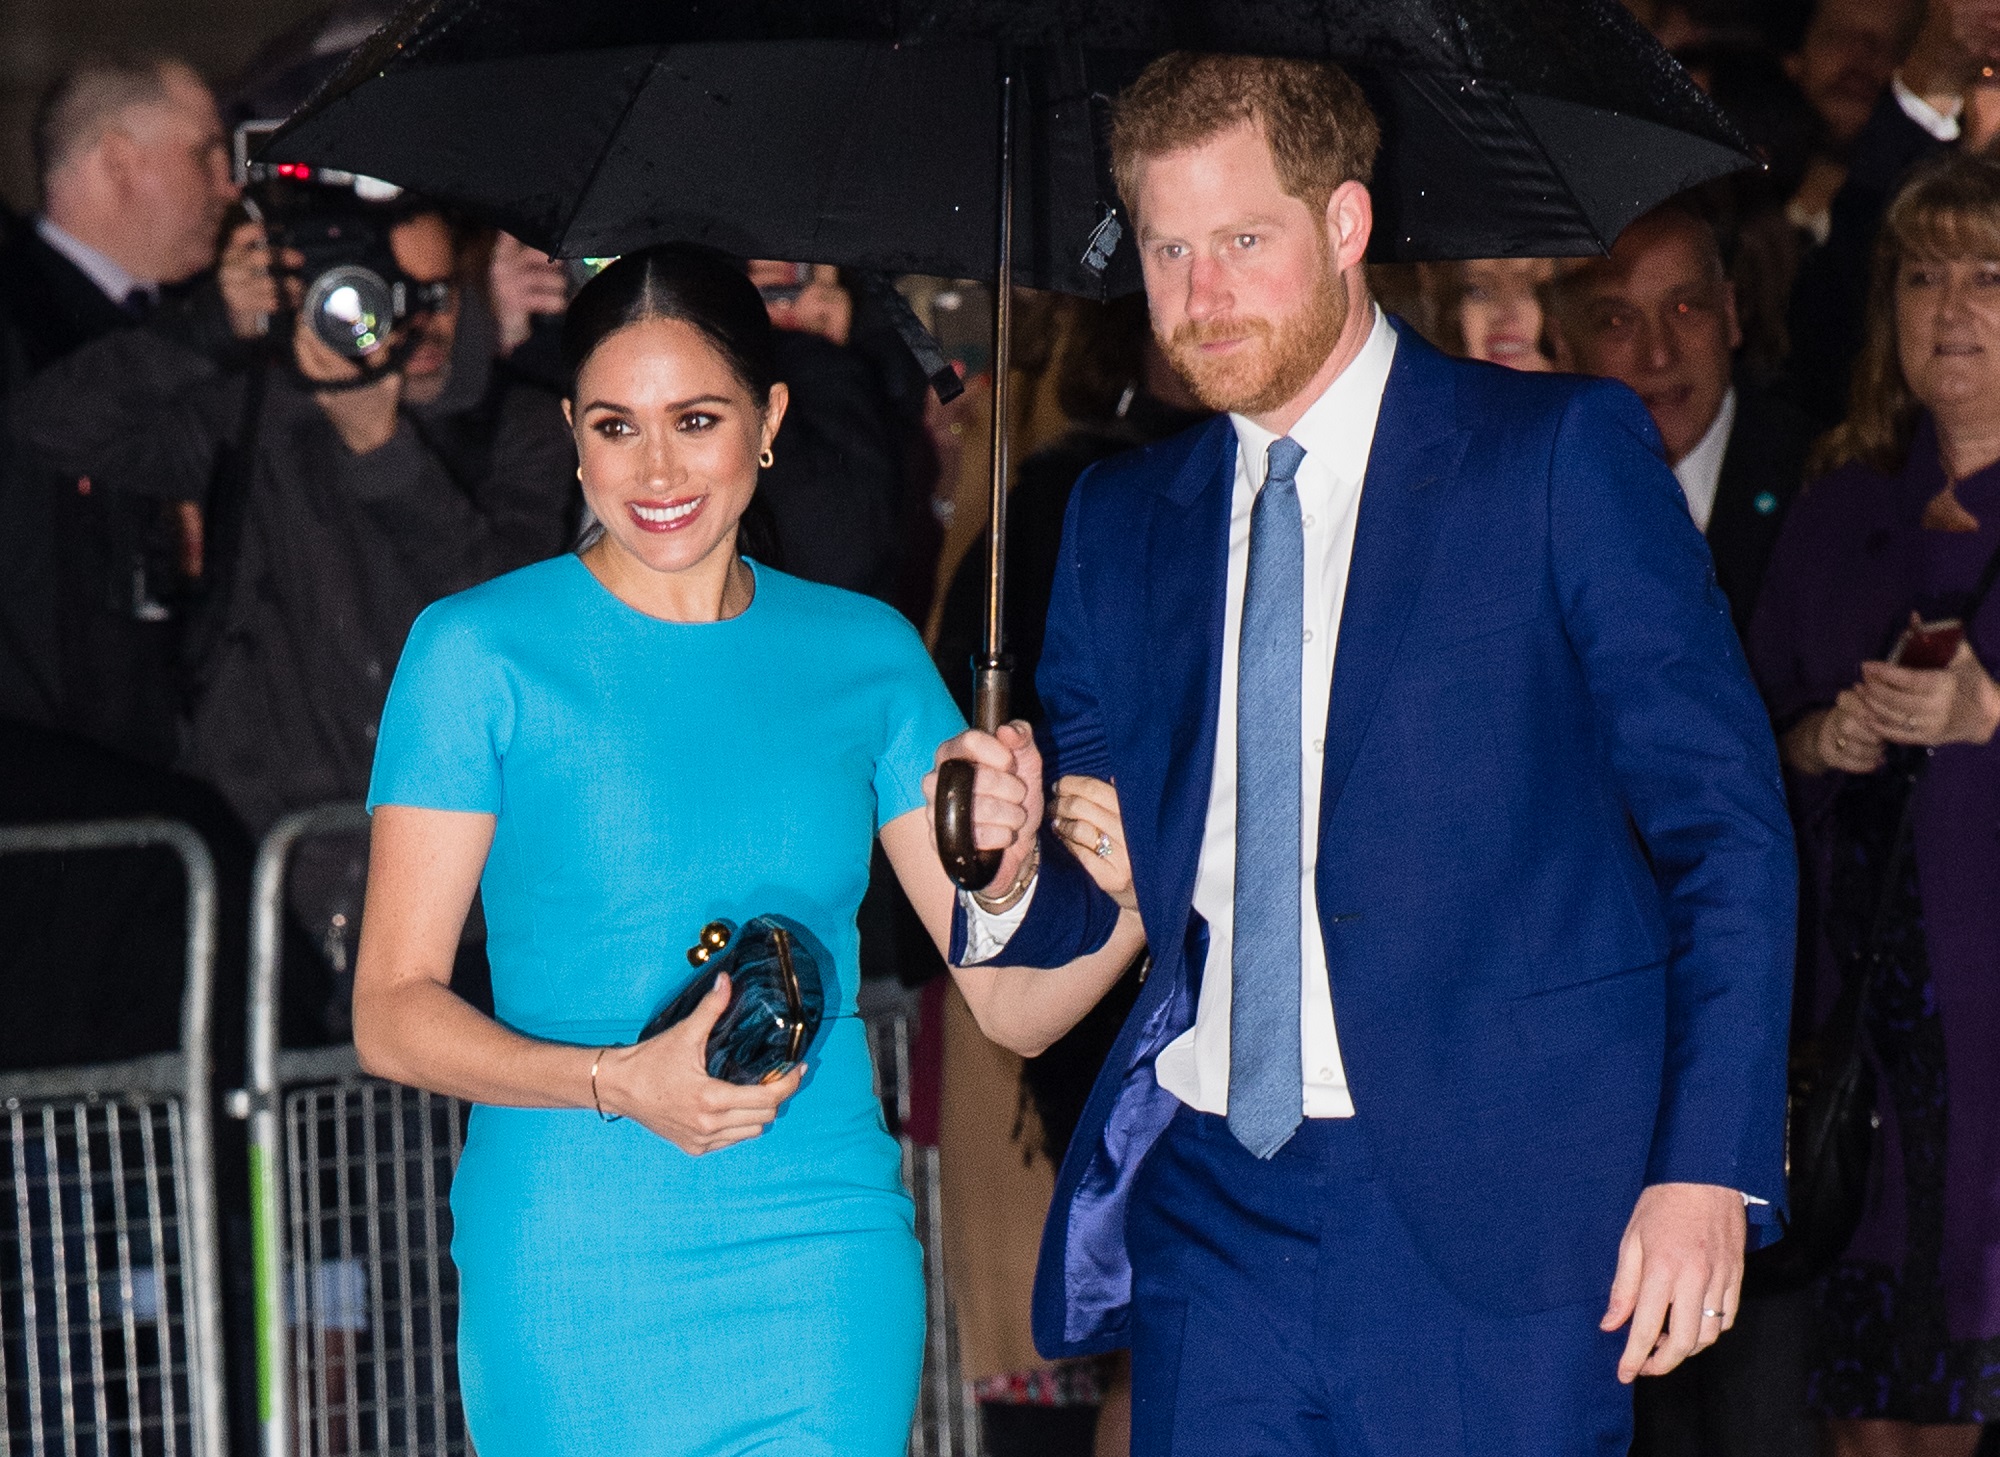 Prince Harry and Meghan Markle stand in the rain under an umbrella outside The Endeavour Fund Awards at Mansion House